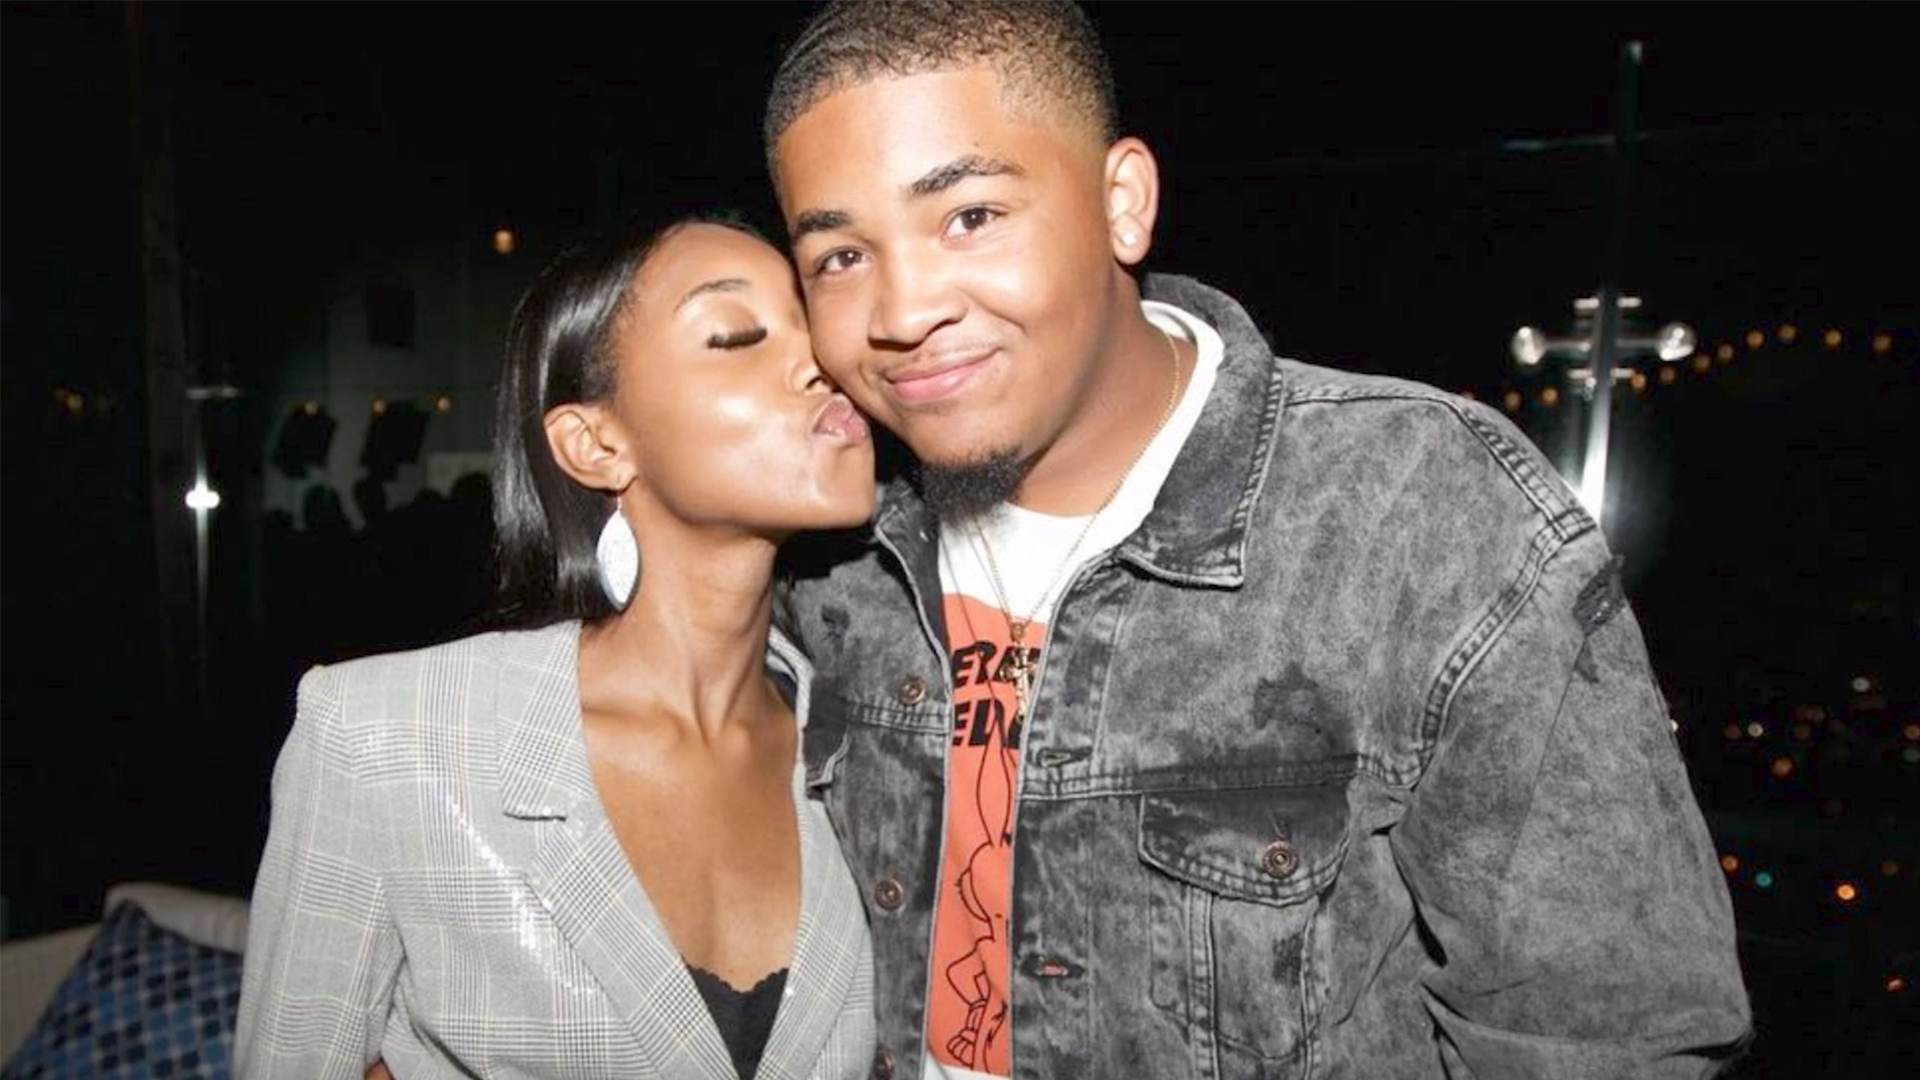 Shaniah & Willie Are Young and in Love!